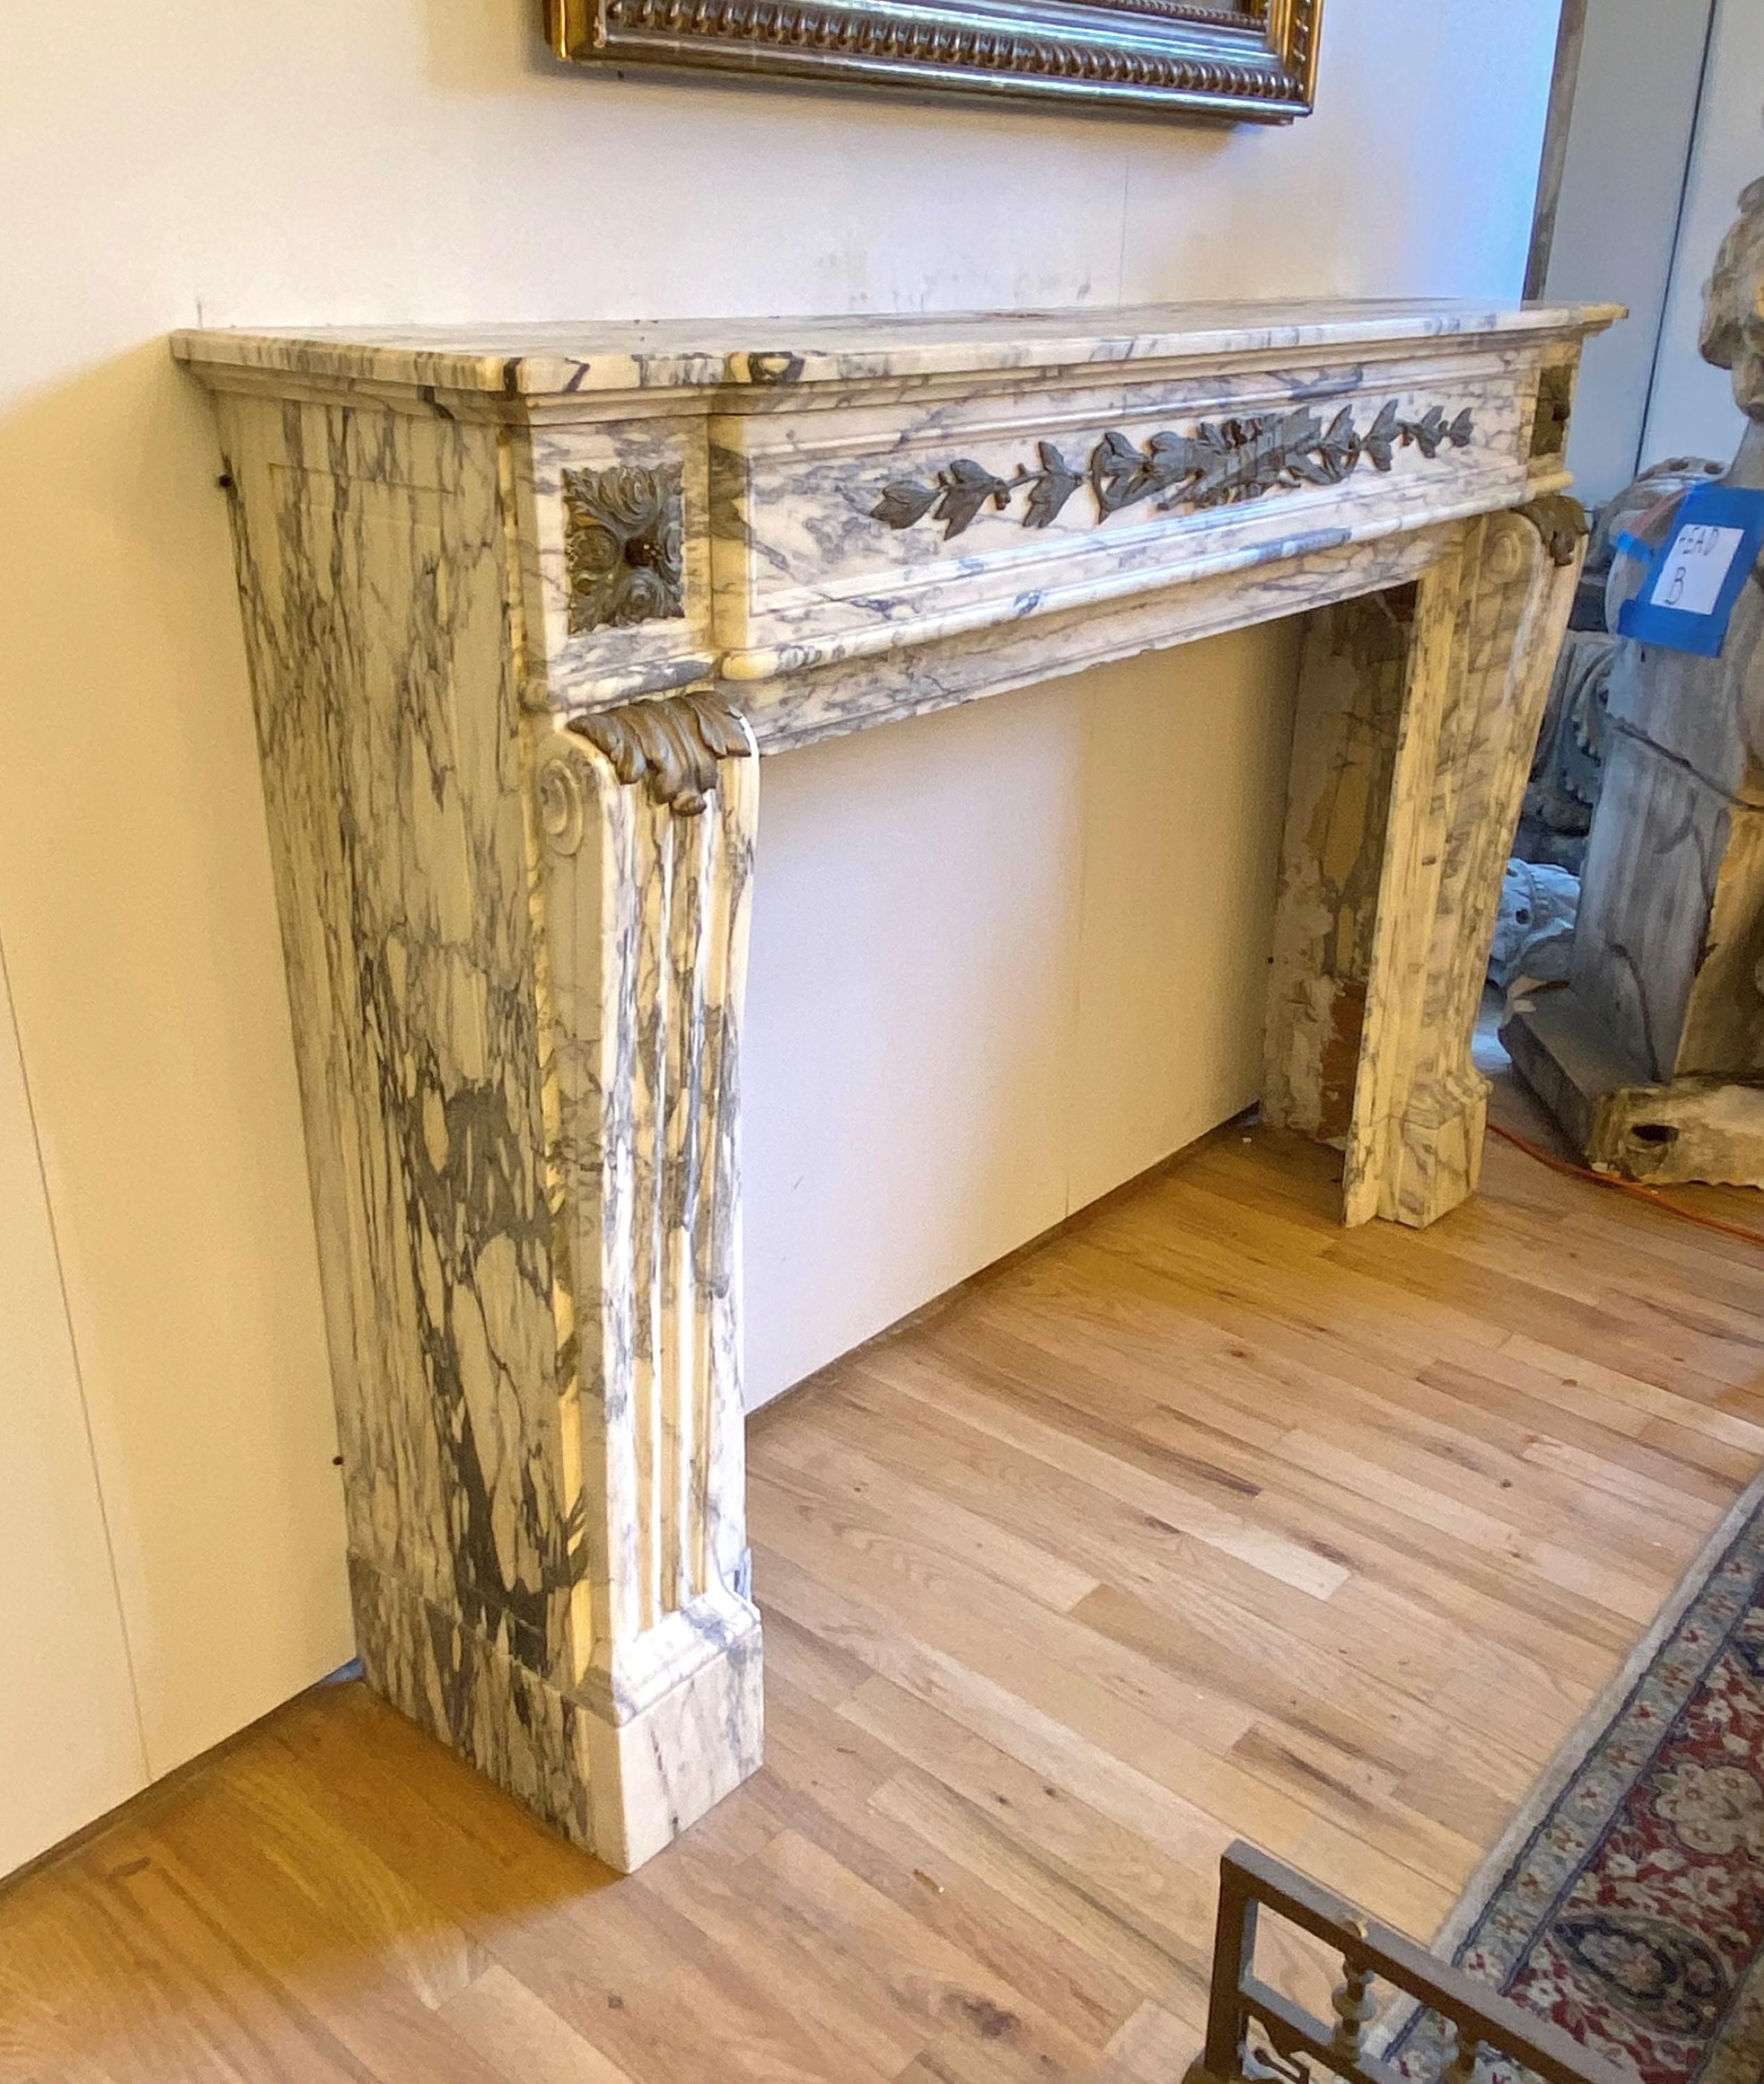 Presented here is an exquisite marble mantel sourced from room 1163 of the renowned Plaza Hotel in New York City. Crafted from premium marble, this remarkable piece showcases intricate hand carvings and is adorned with ornate bronze ormolu details.